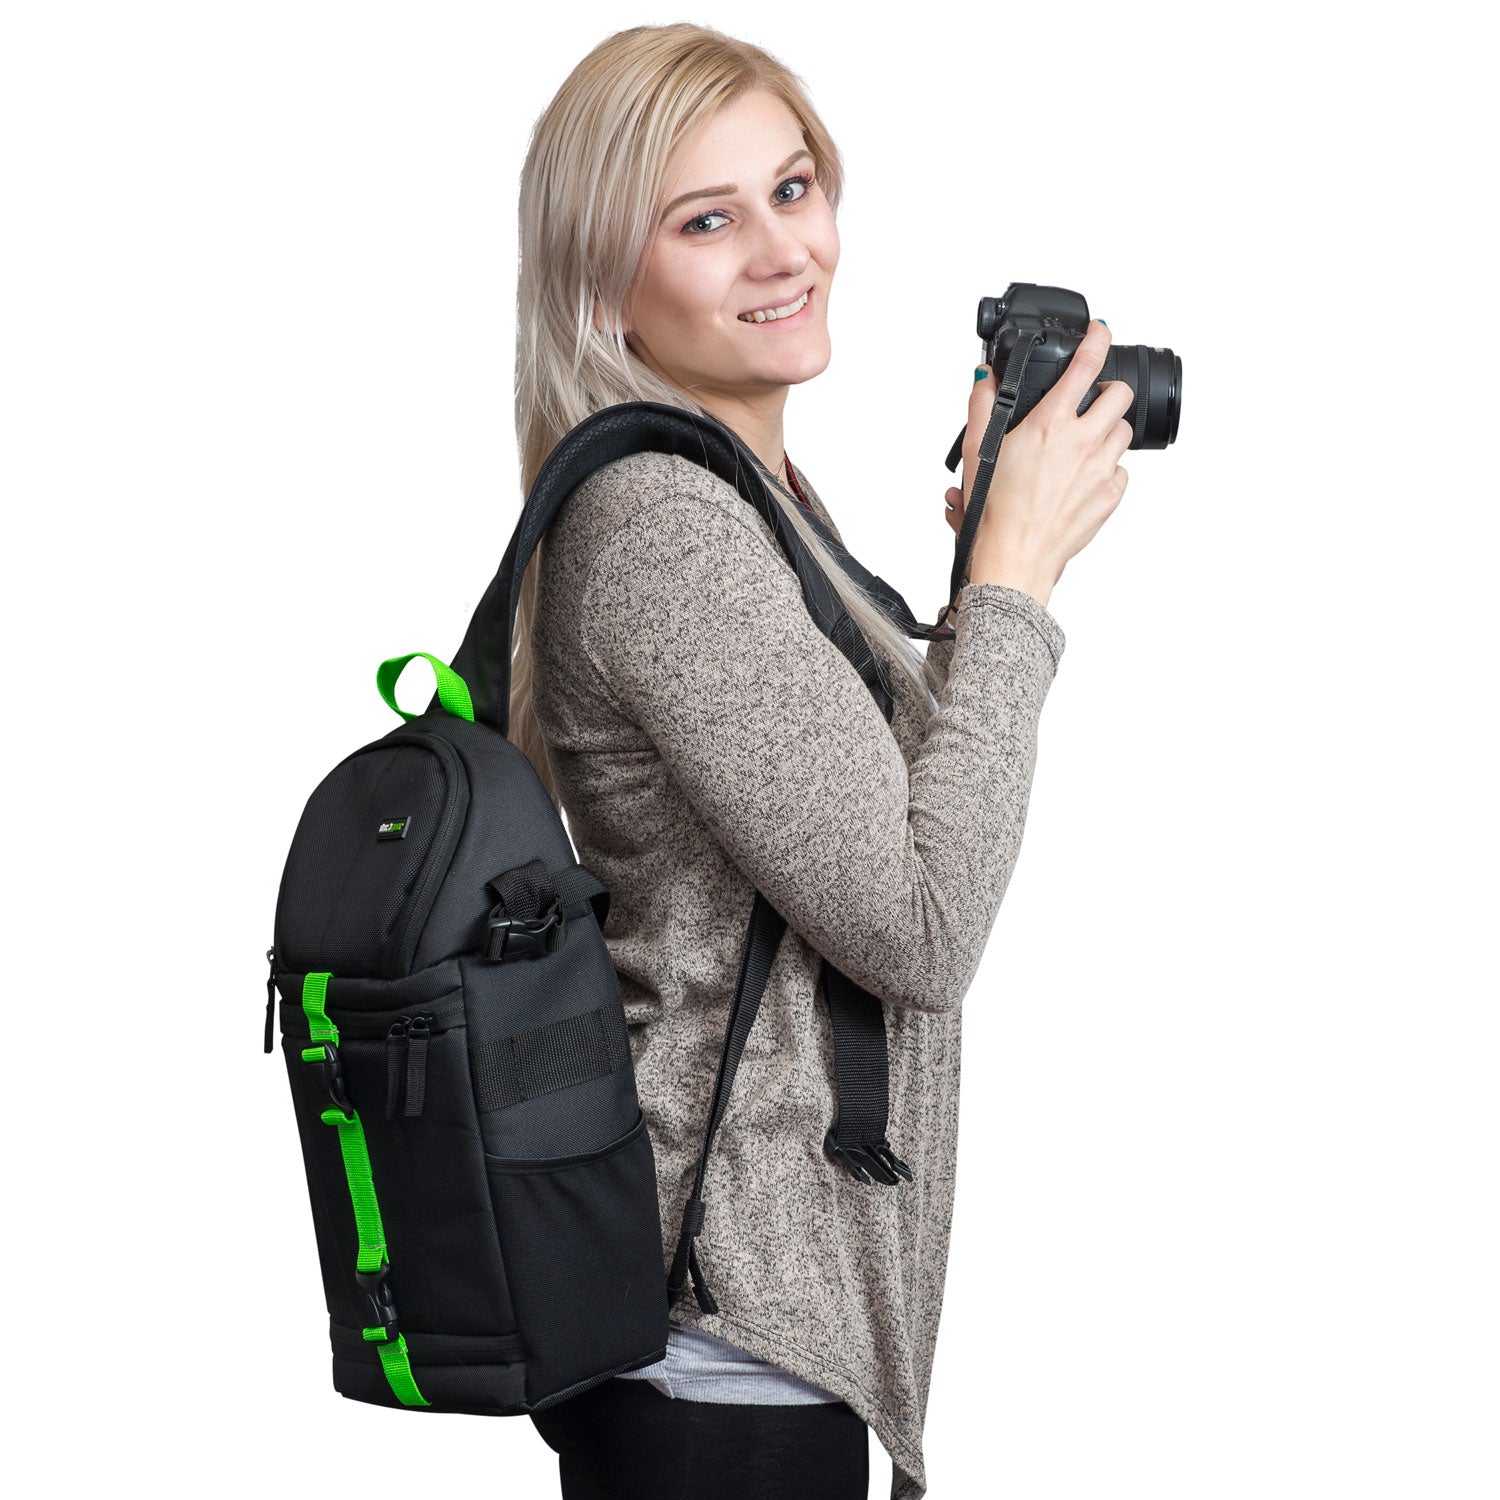 Deco Gear Sling Backpack Accessories Kit for DSLR and Mirrorless Cameras - Deco Gear